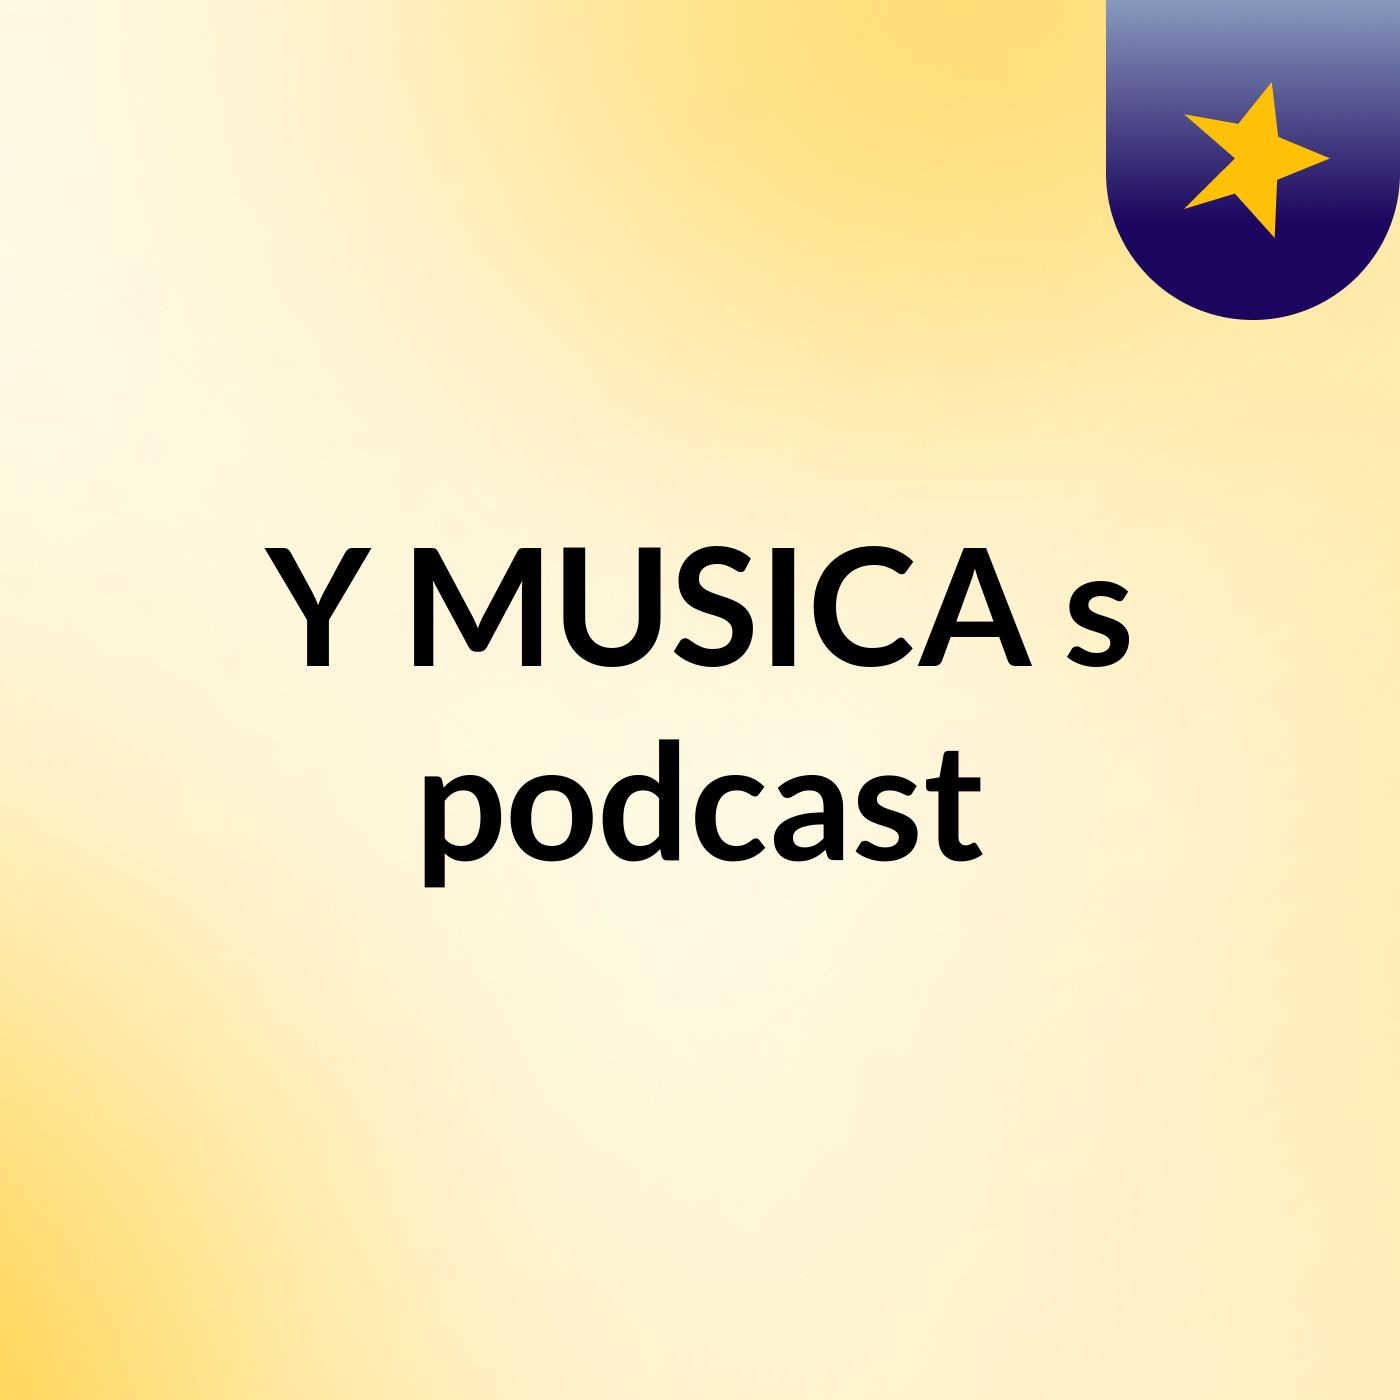 Y MUSICA's podcast